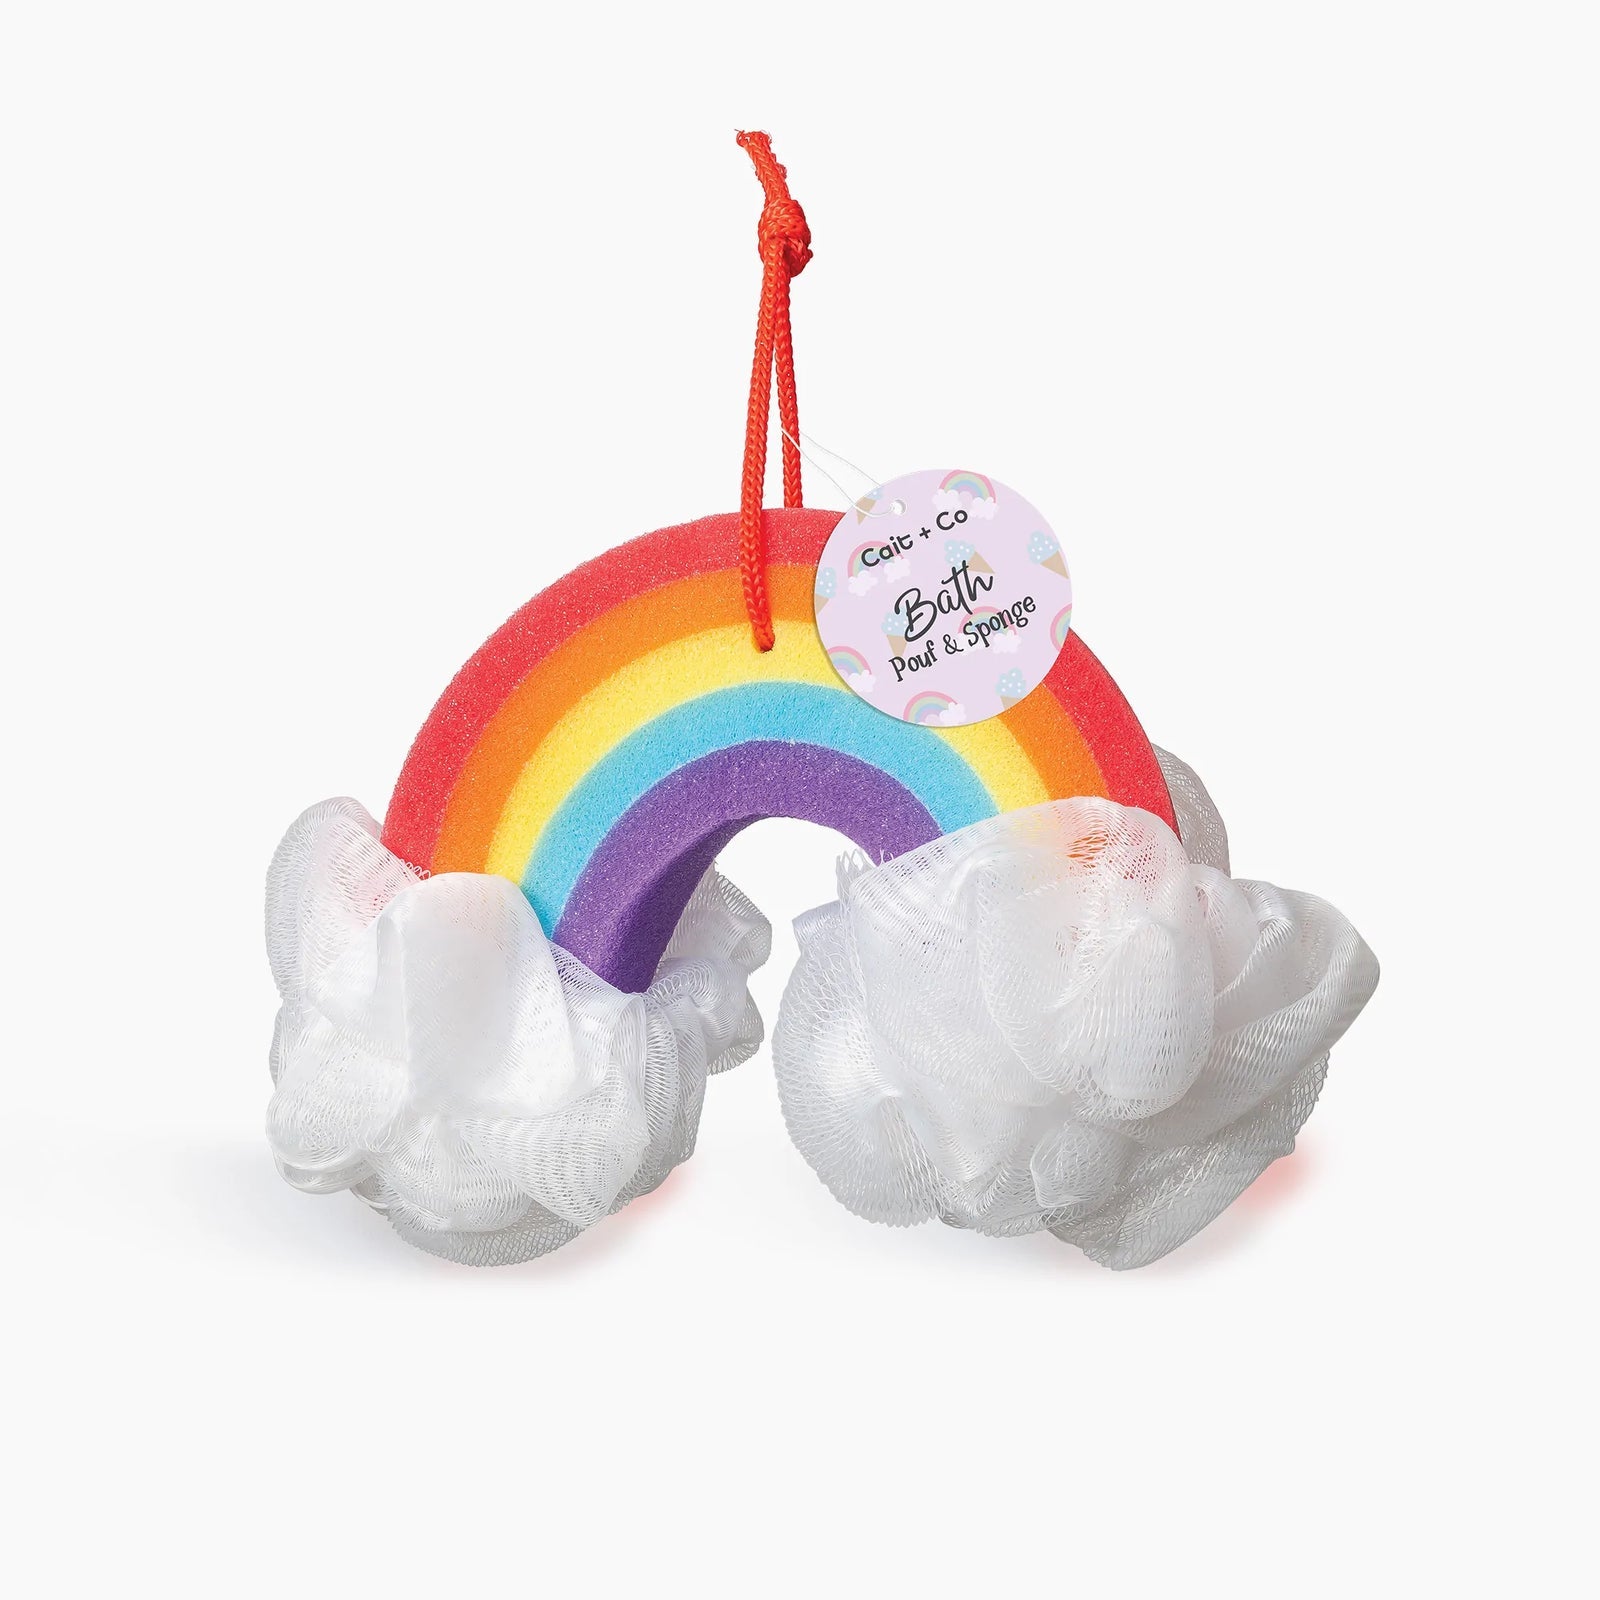 Forever Young Bath Pouf and Sponge Rainbow